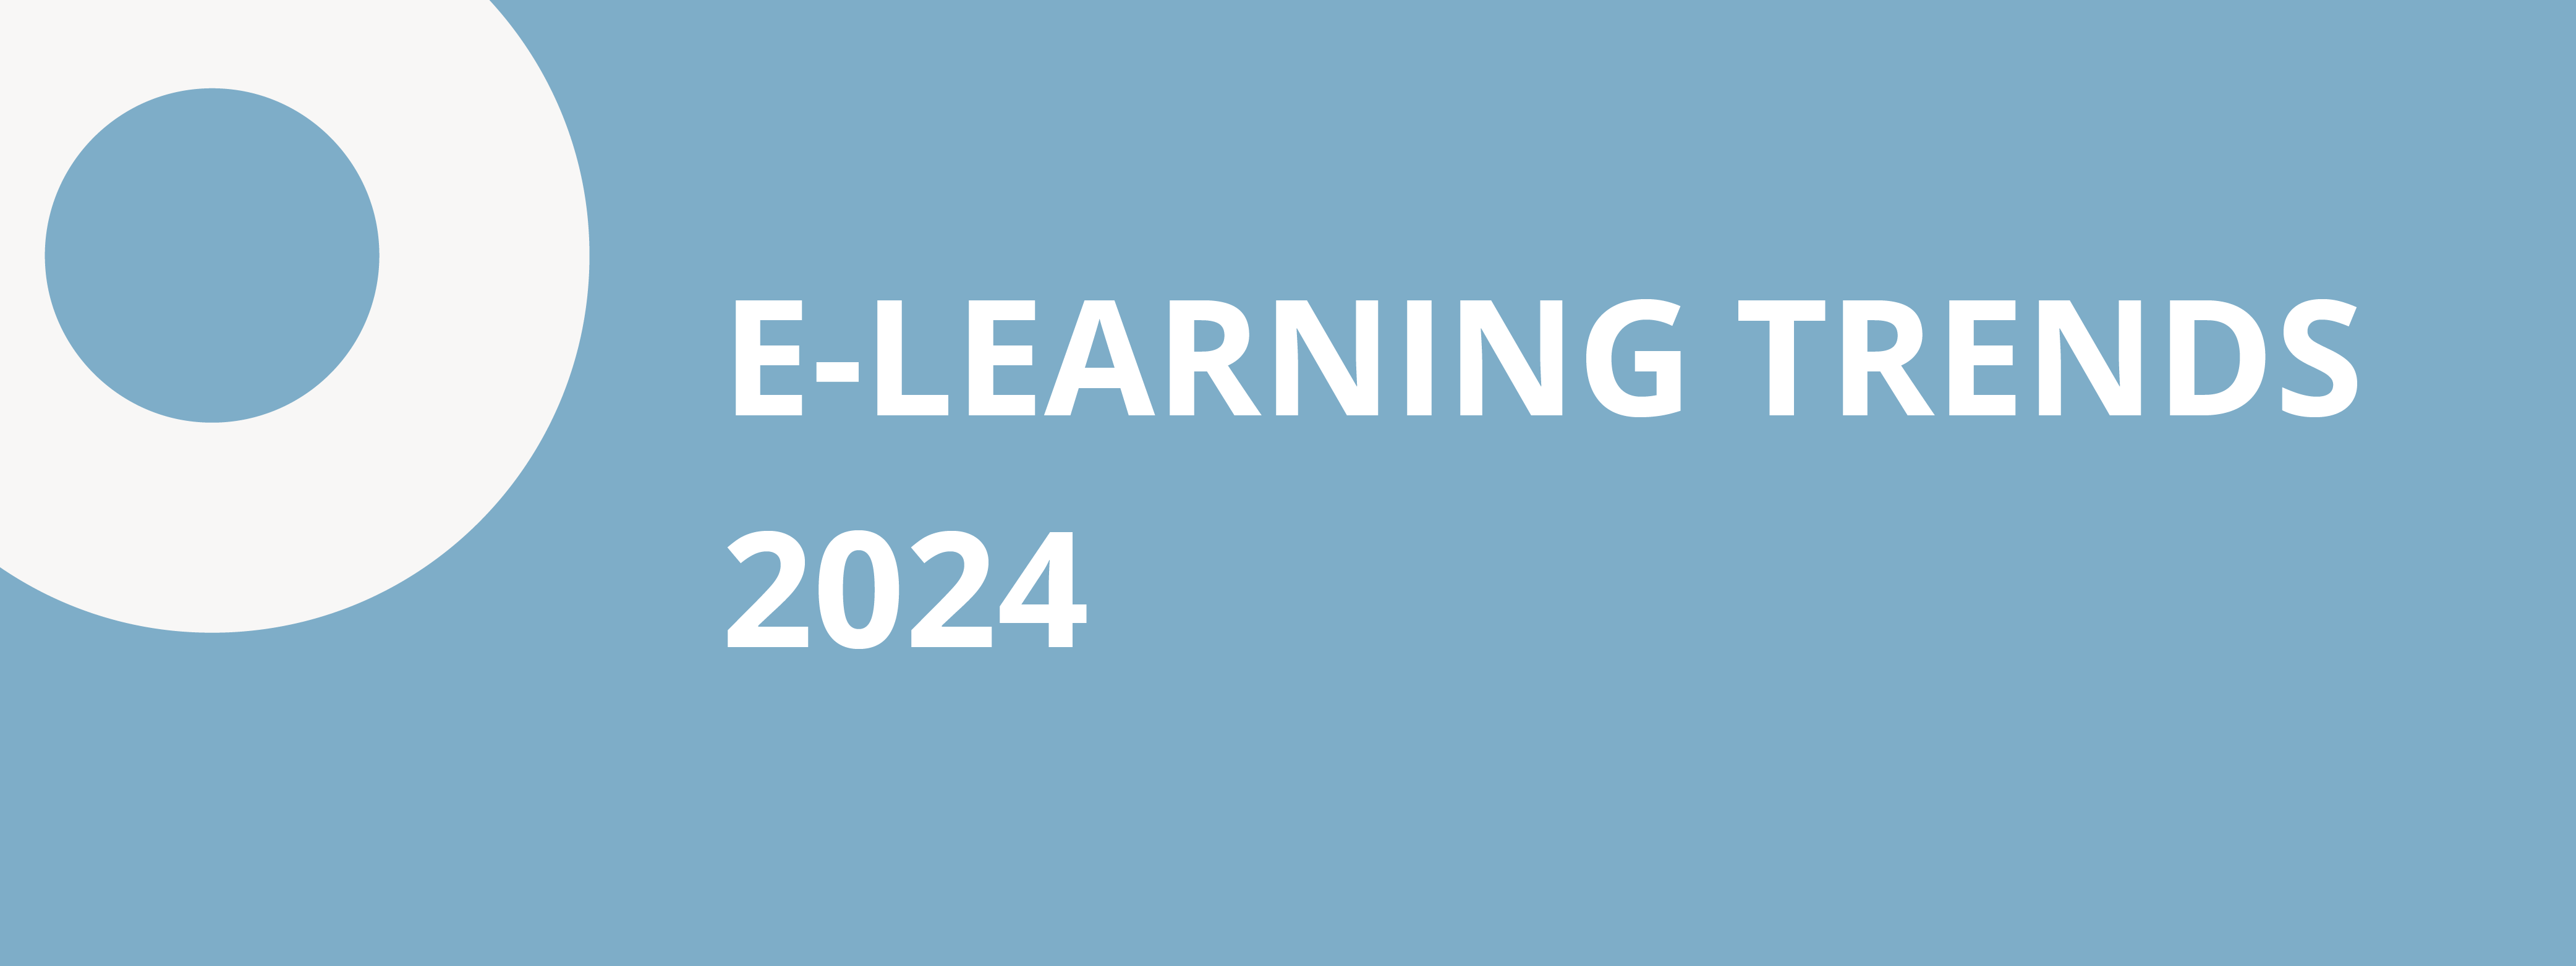 elearning trends 2024